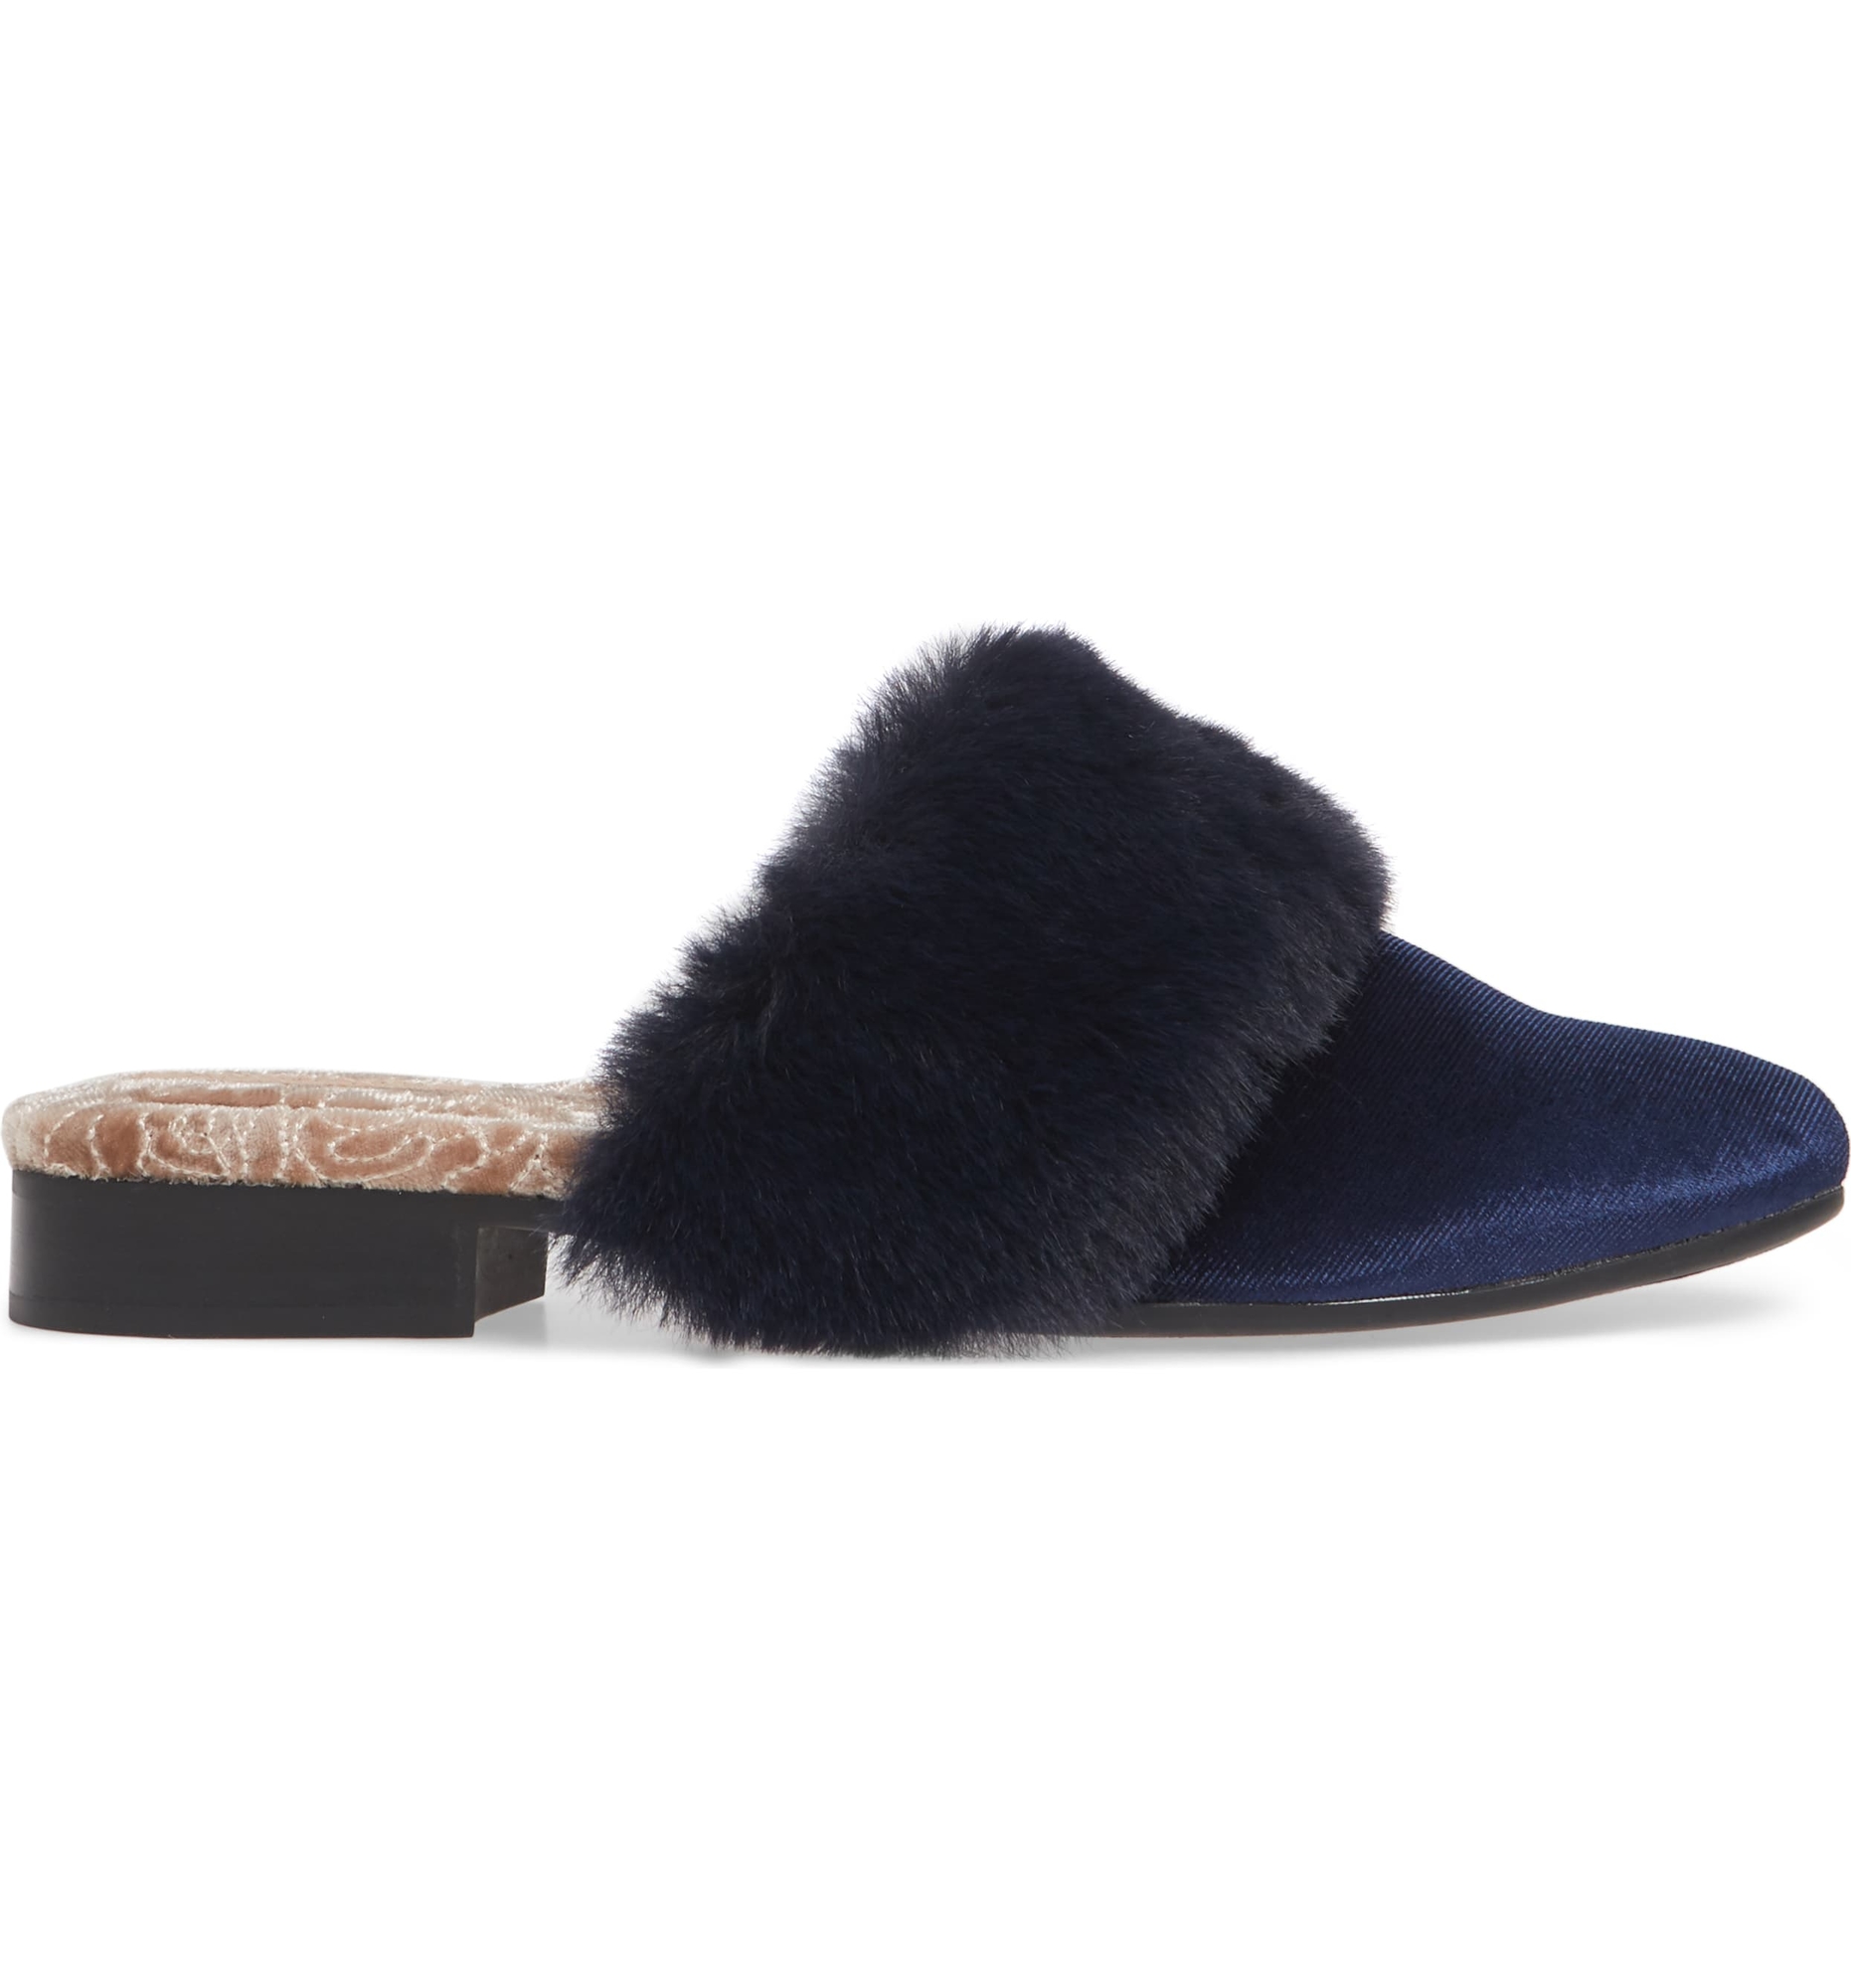 5 Cozy Designer Slippers That Will Keep 